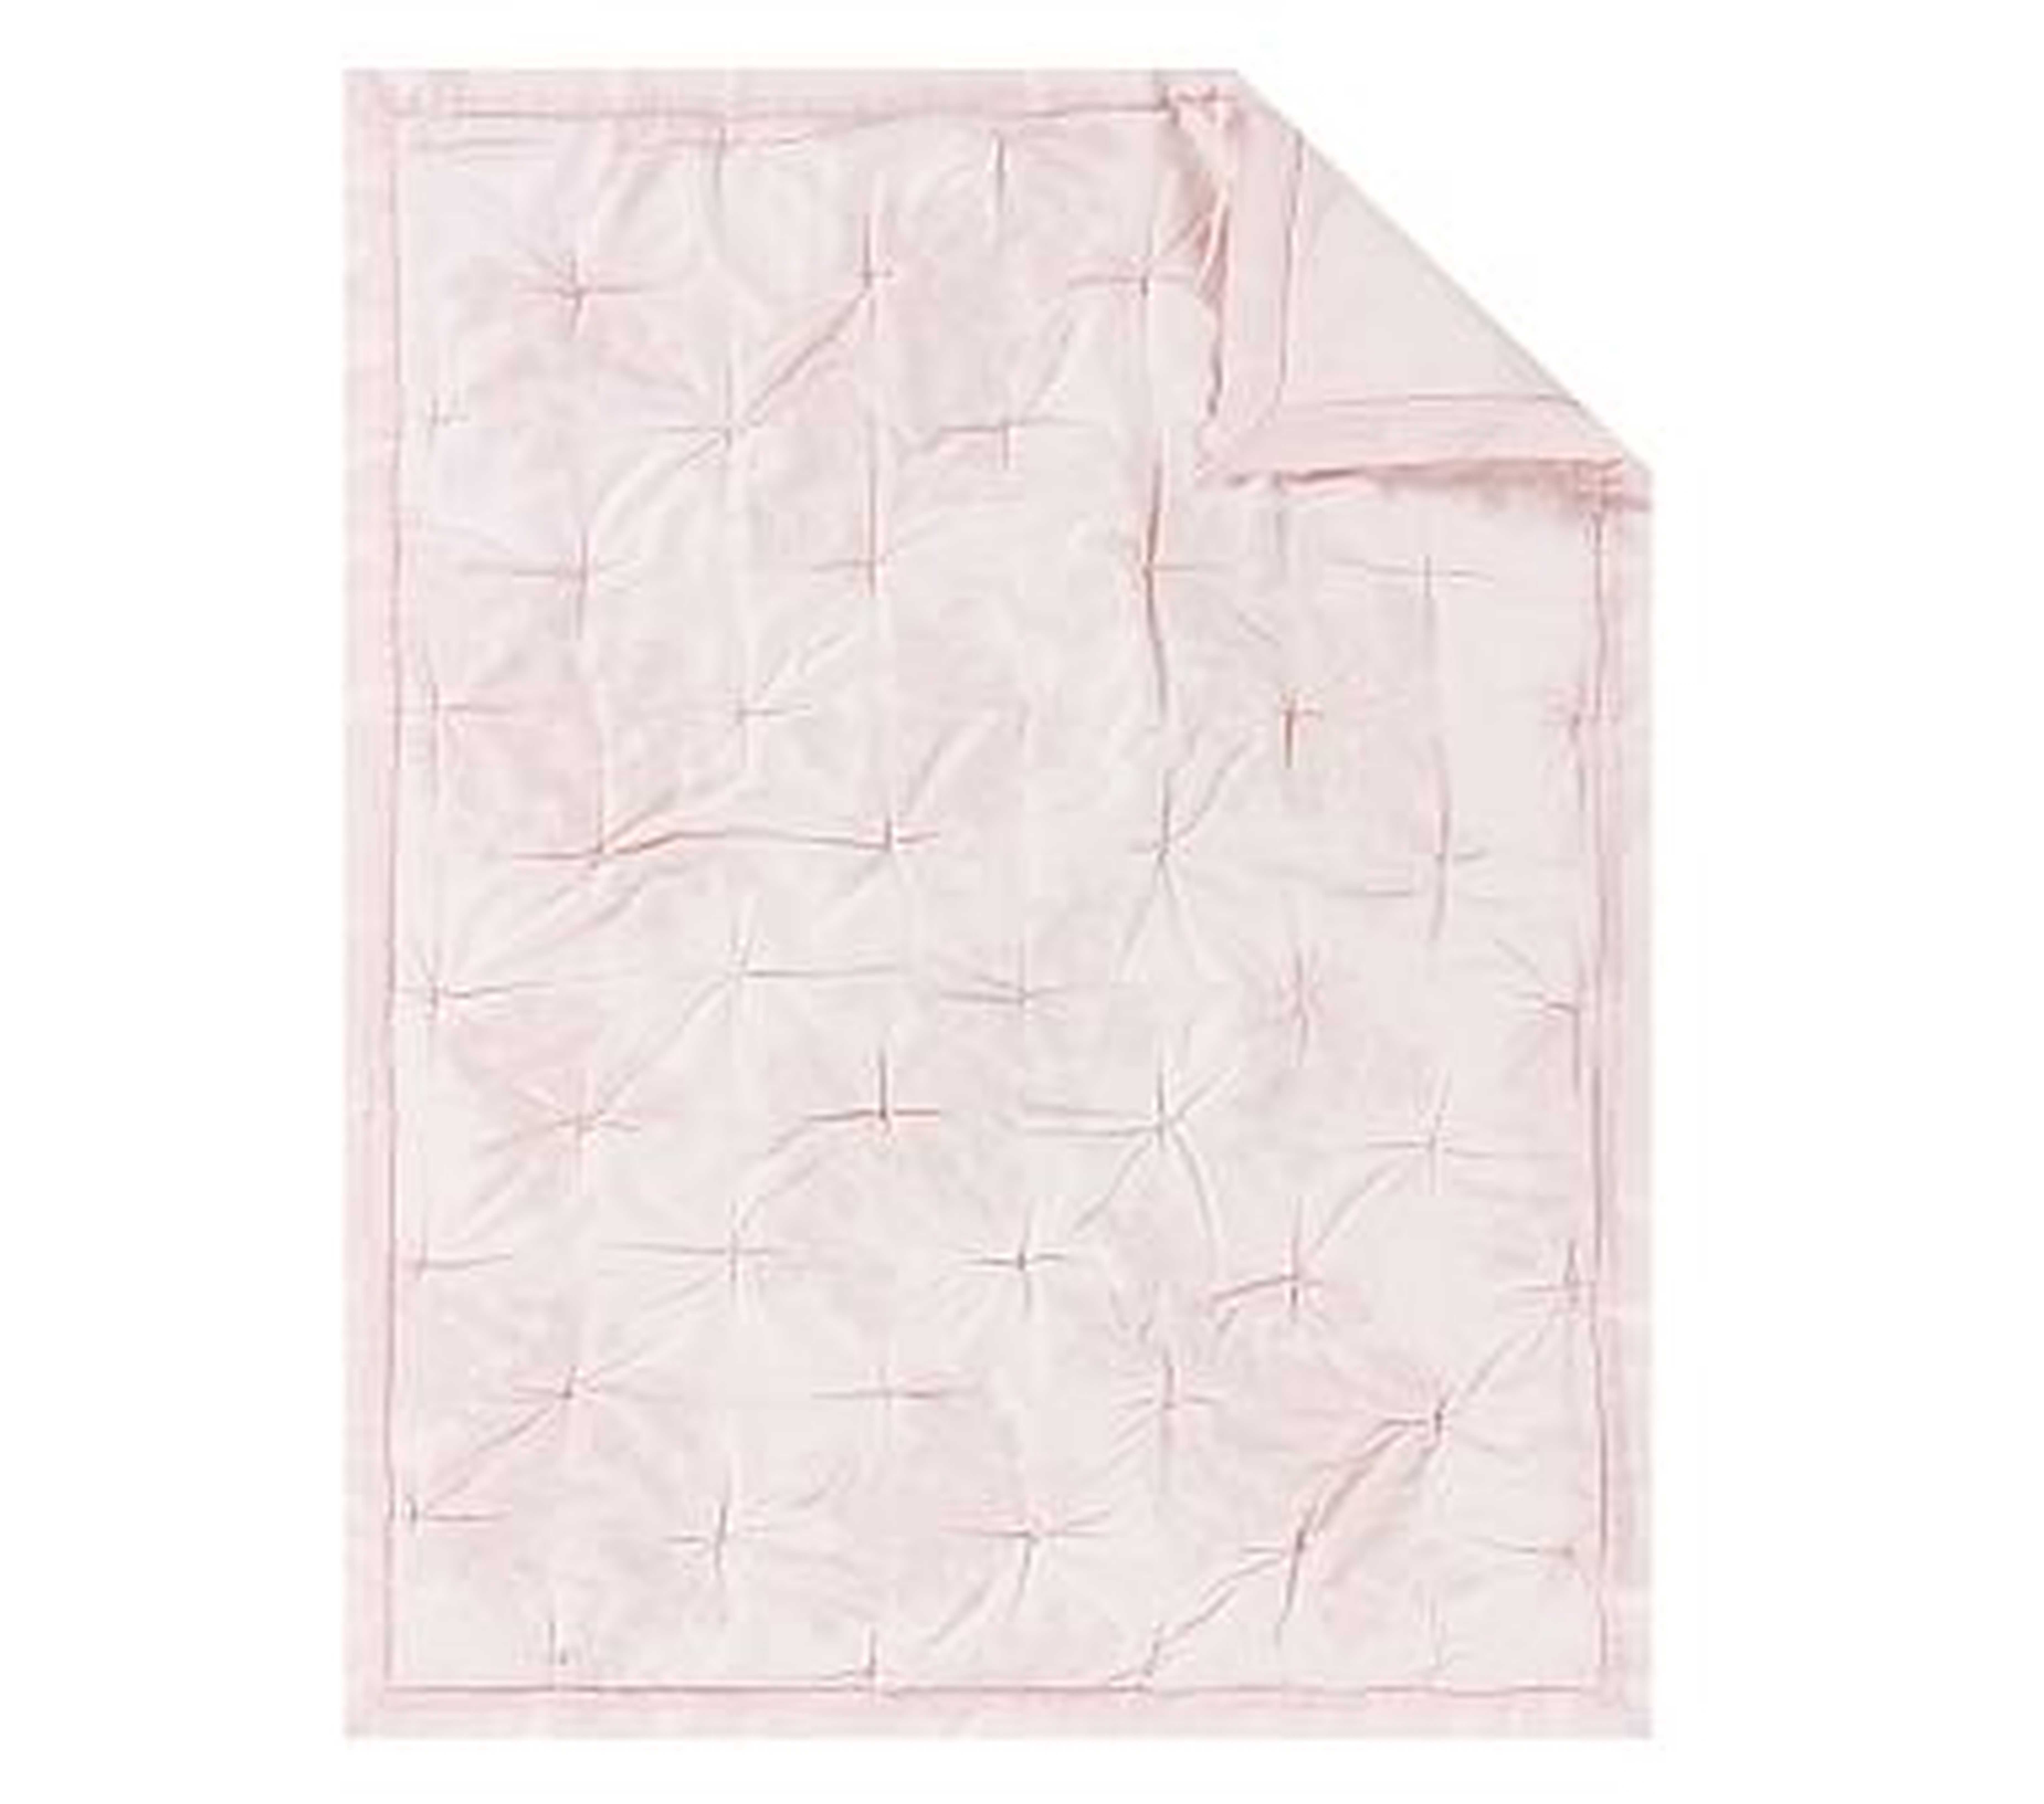 Monique Lhuillier Ethereal Lace Toddler Quilt, Blush - Pottery Barn Kids